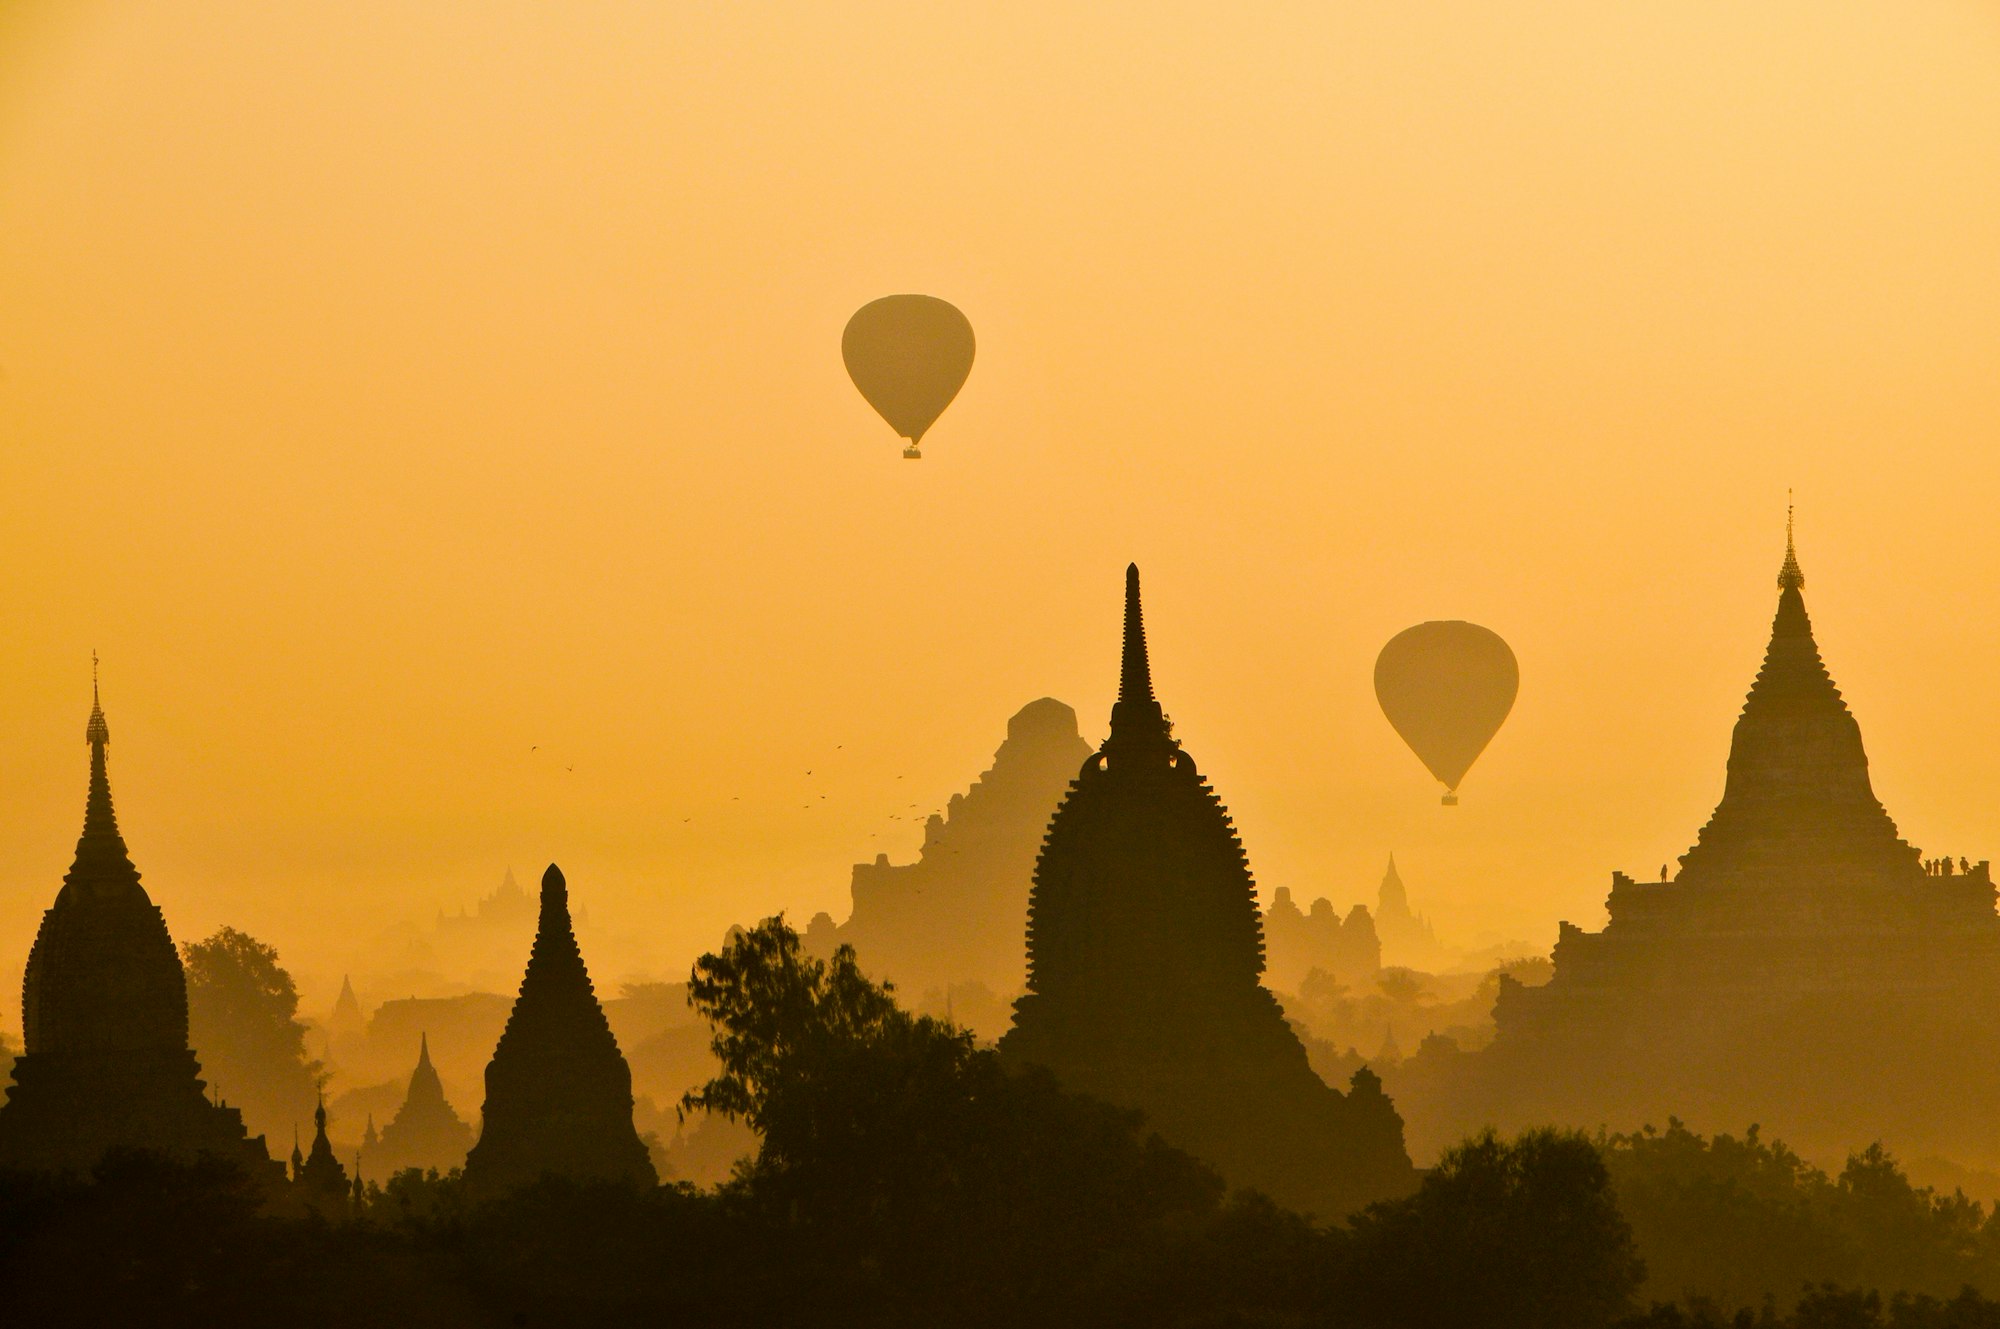 This photo was one of many taken at the Sunrise Pagoda in December of 2011.This was my first trip to Burma, an eye opening trip for sure. In the ancient capital of Bagan, a small boy saw me early in the morning and said, “where you are going?” I said, “to the sunrise Pagoda…”  He said, “I take you a shortcut....” It was a shortcut indeed and after climbing to the second level of this ancient pagoda the light was perfect, the balloons came and viola! I gave my tour guide a small reward for his efforts to get me there in time. I was happy to capture this shot and want to share it with the world.